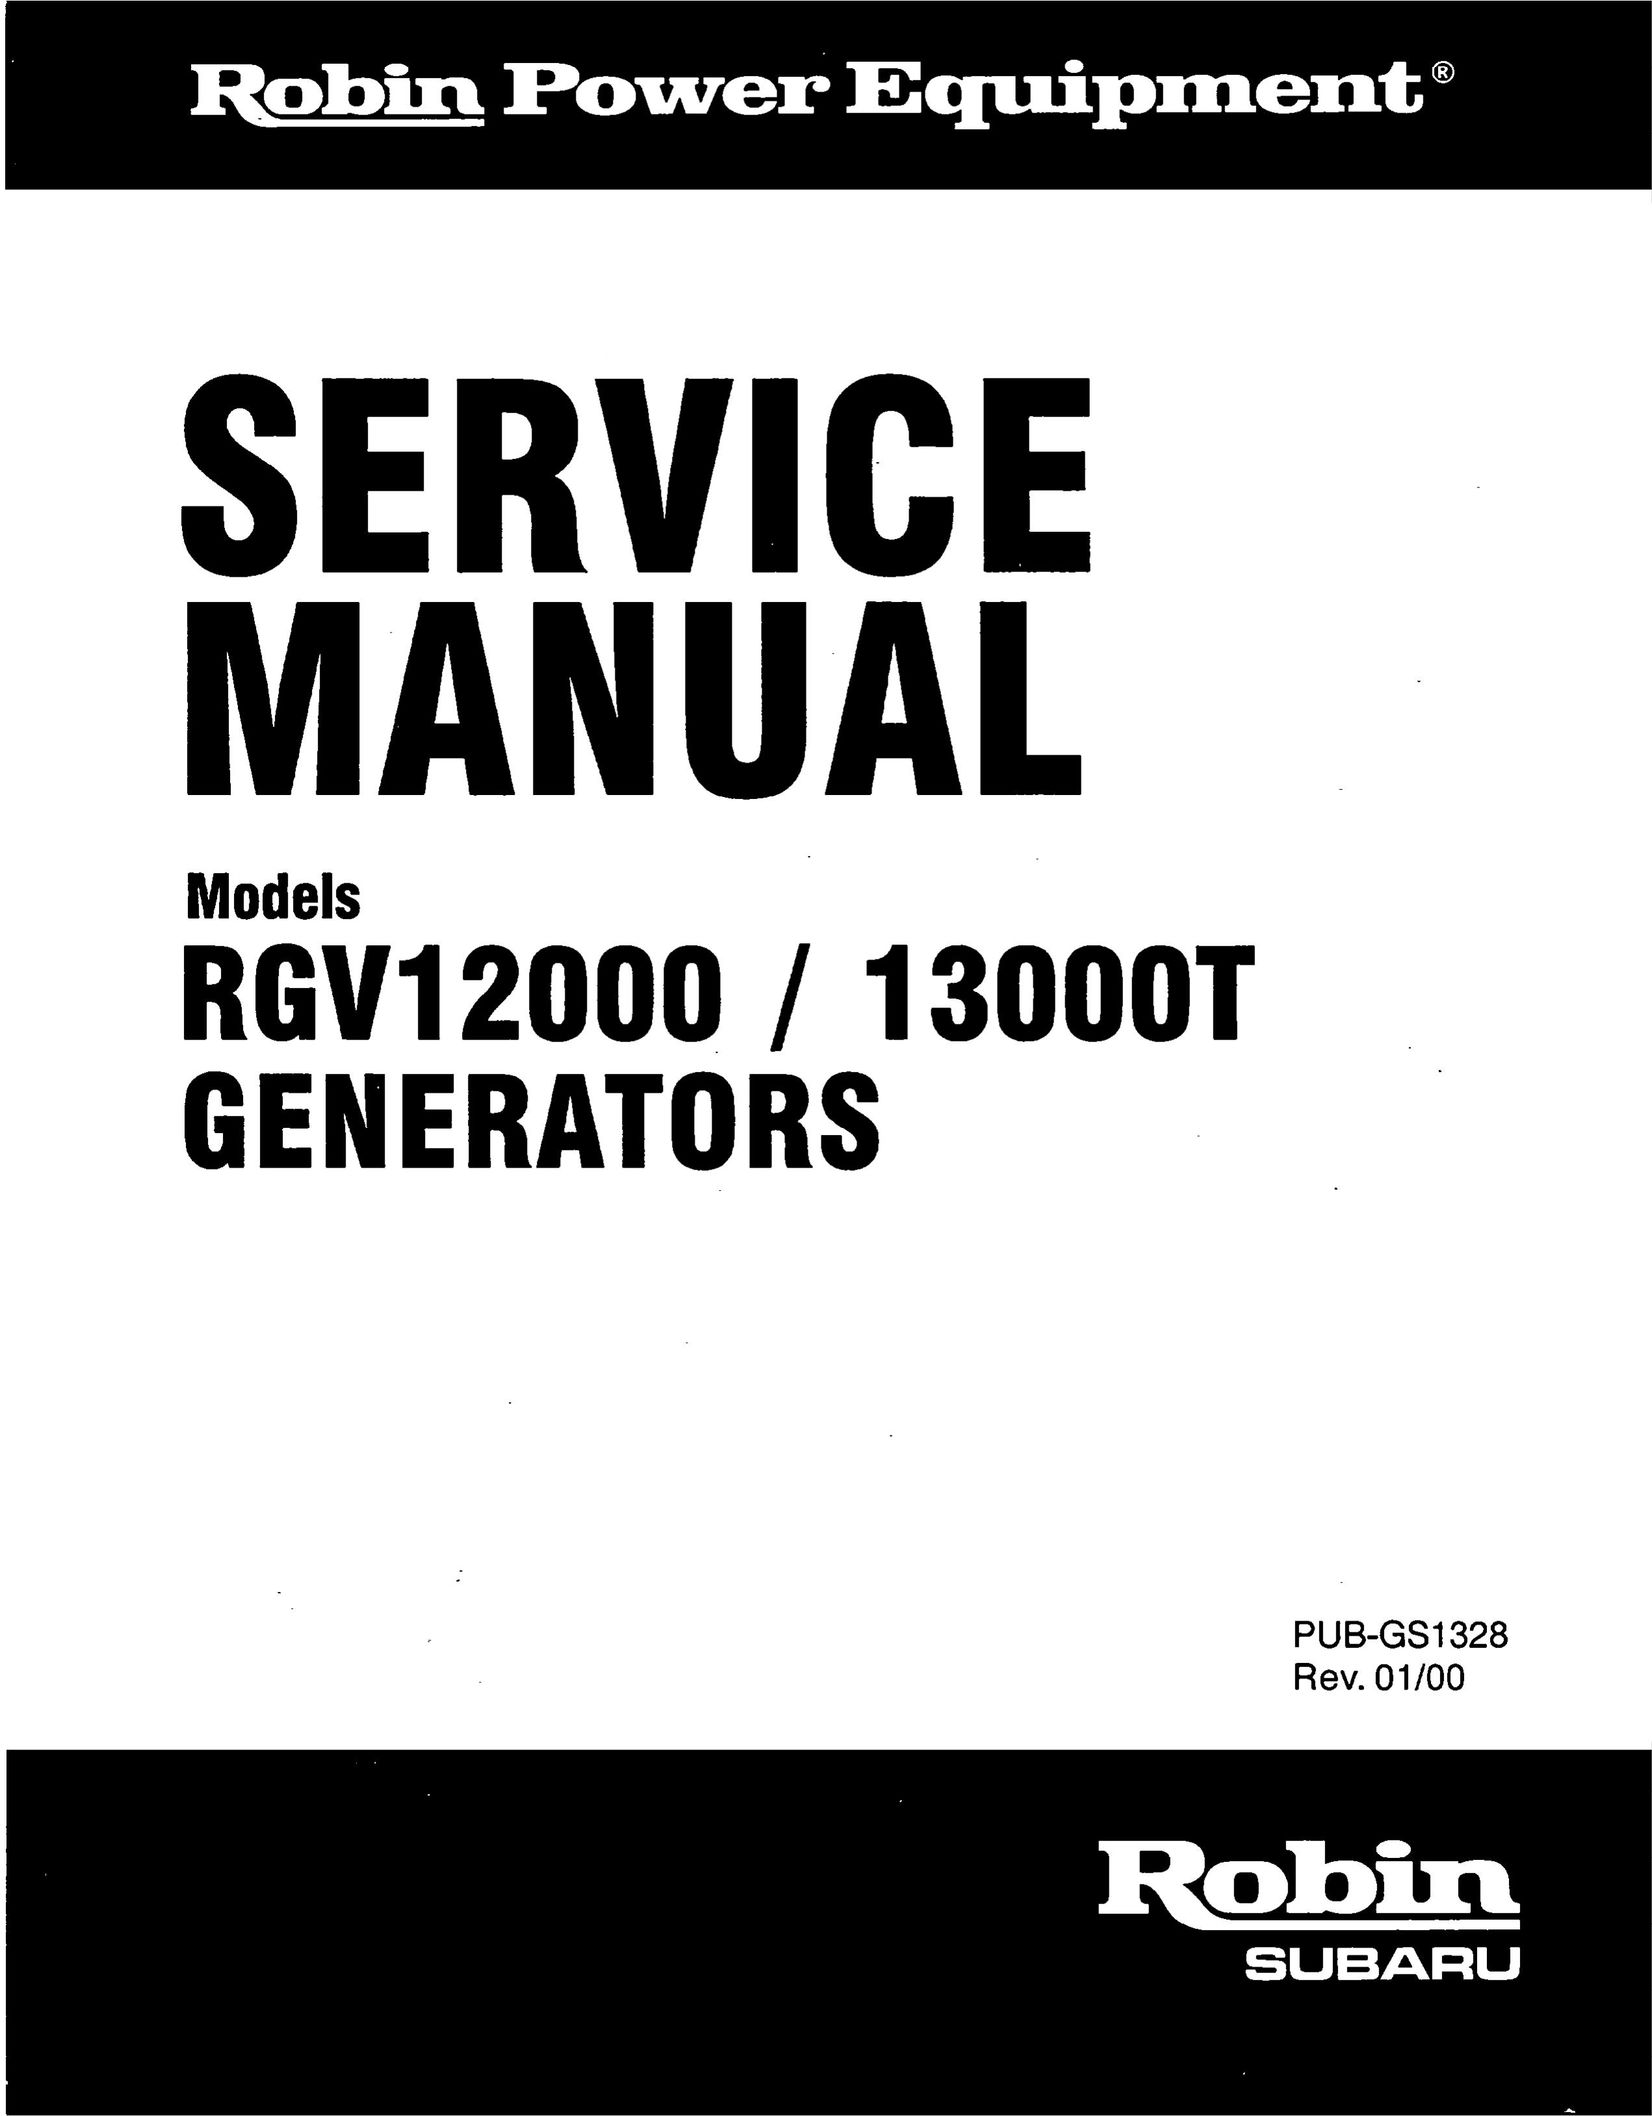 Subaru Robin Power Products RGVL2000 Cassette Player User Manual